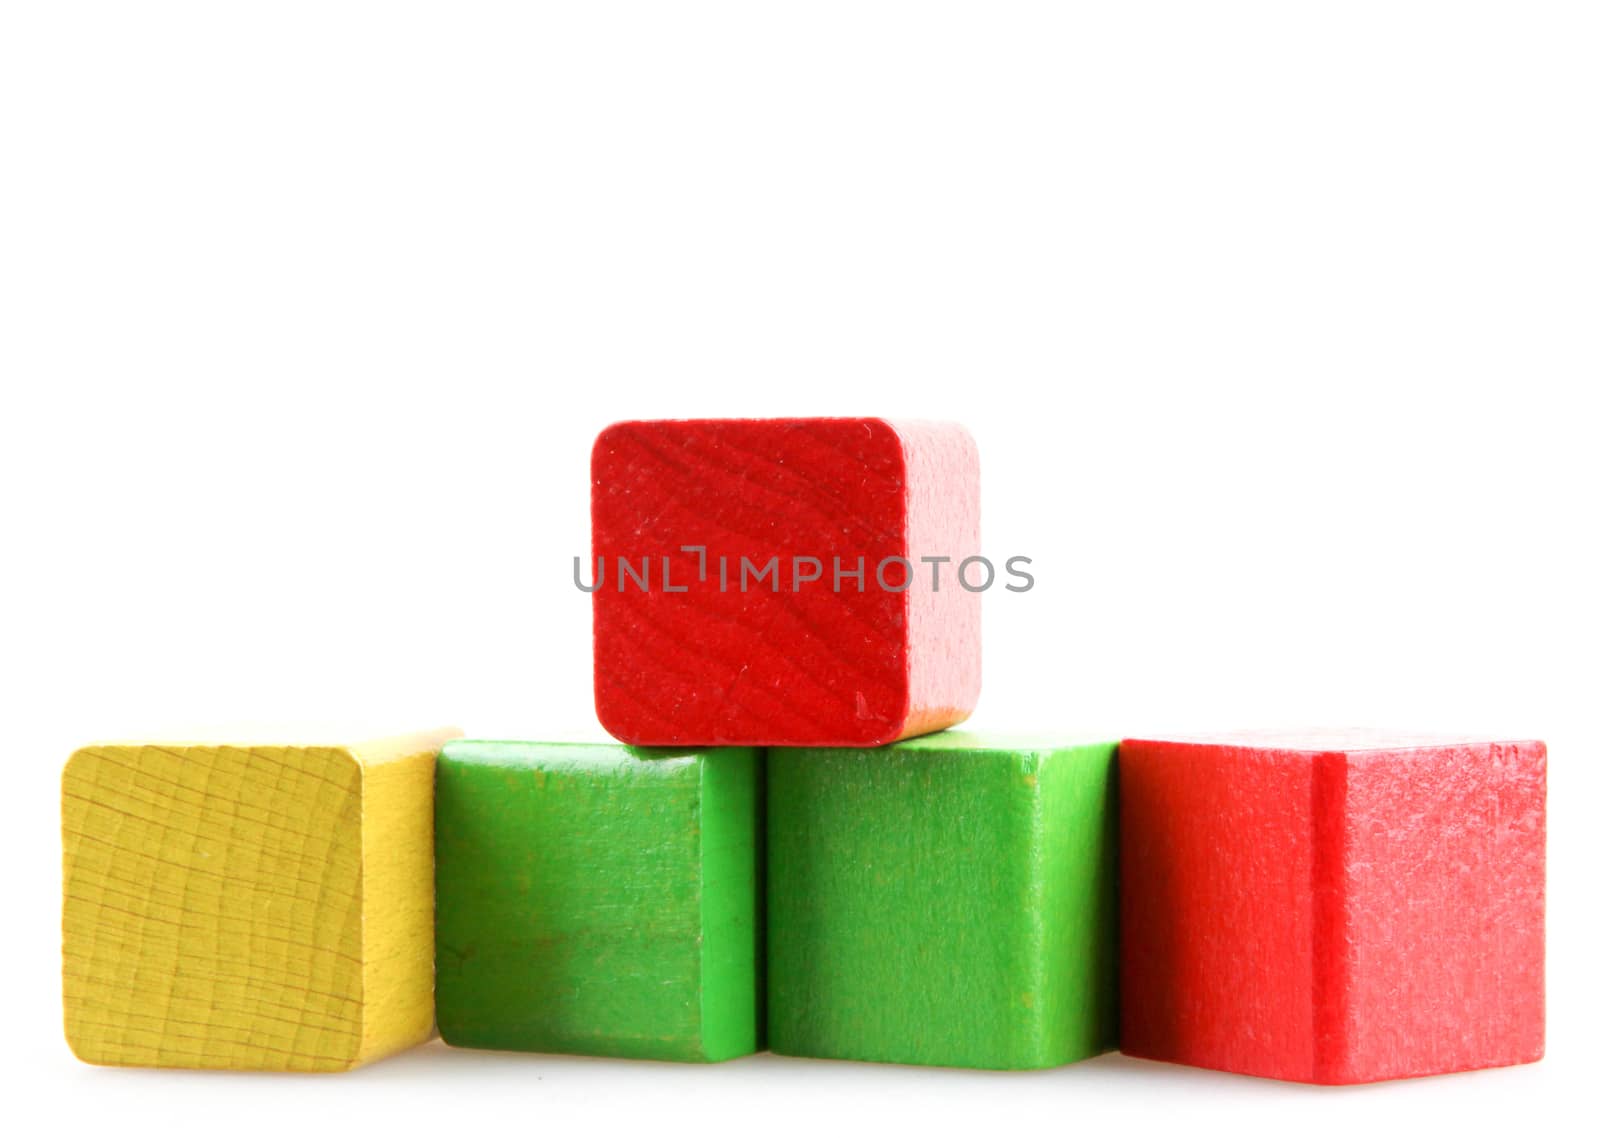 Colorful Wooden Building Blocks Toys